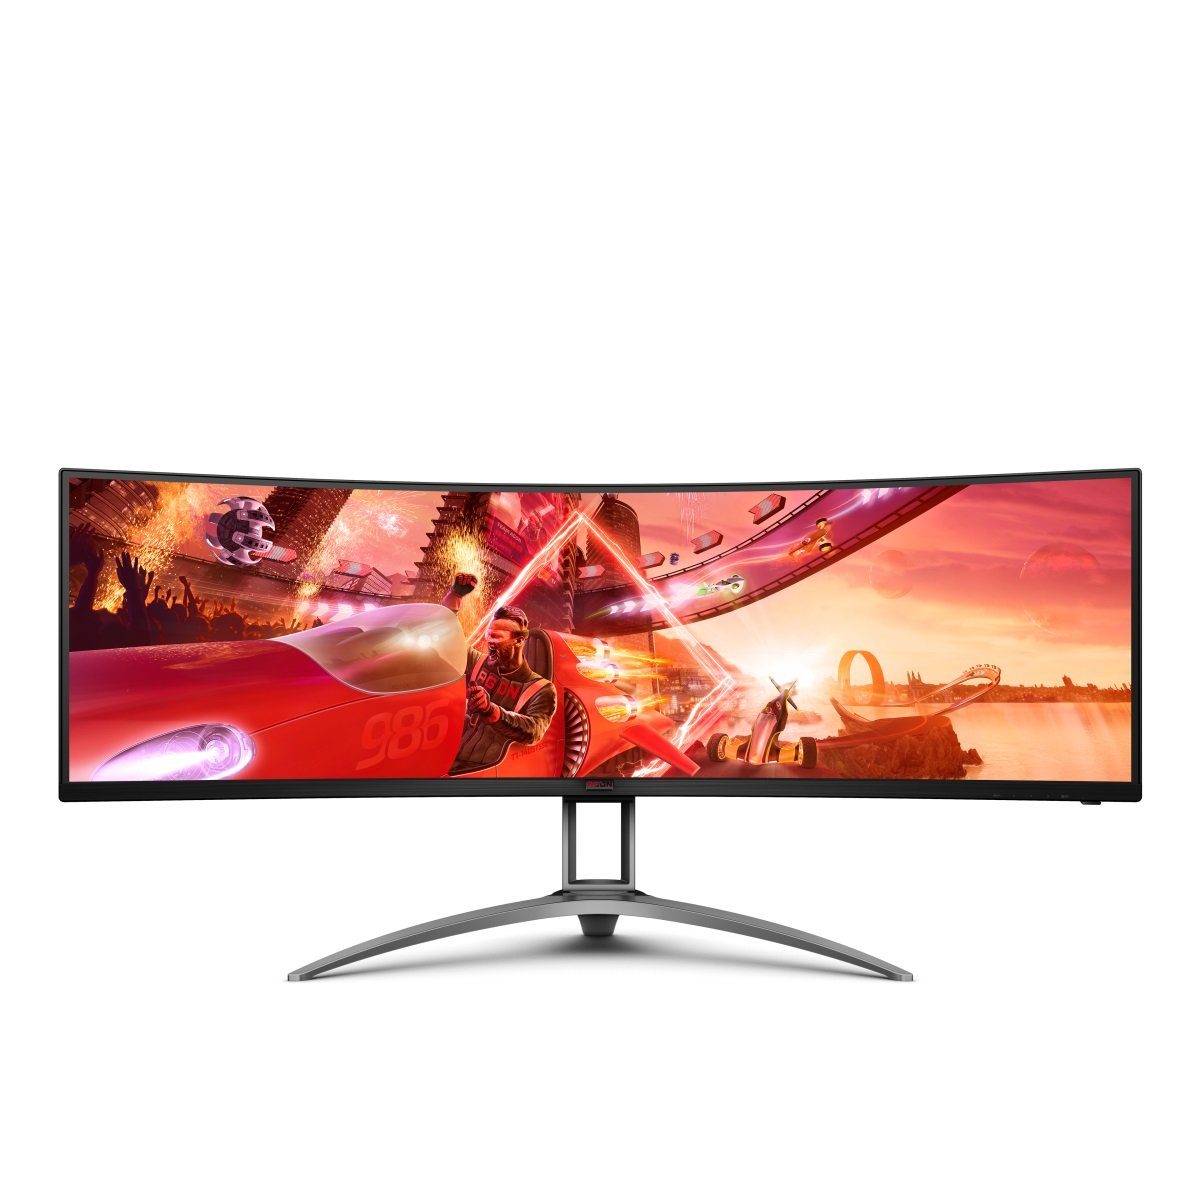 AOC AG493UCX2 Curved-Gaming-Monitor (124 cm/49 ", 5120 x 1440 px, DQHD, 1 ms Reaktionszeit, 165 Hz, VA LCD)